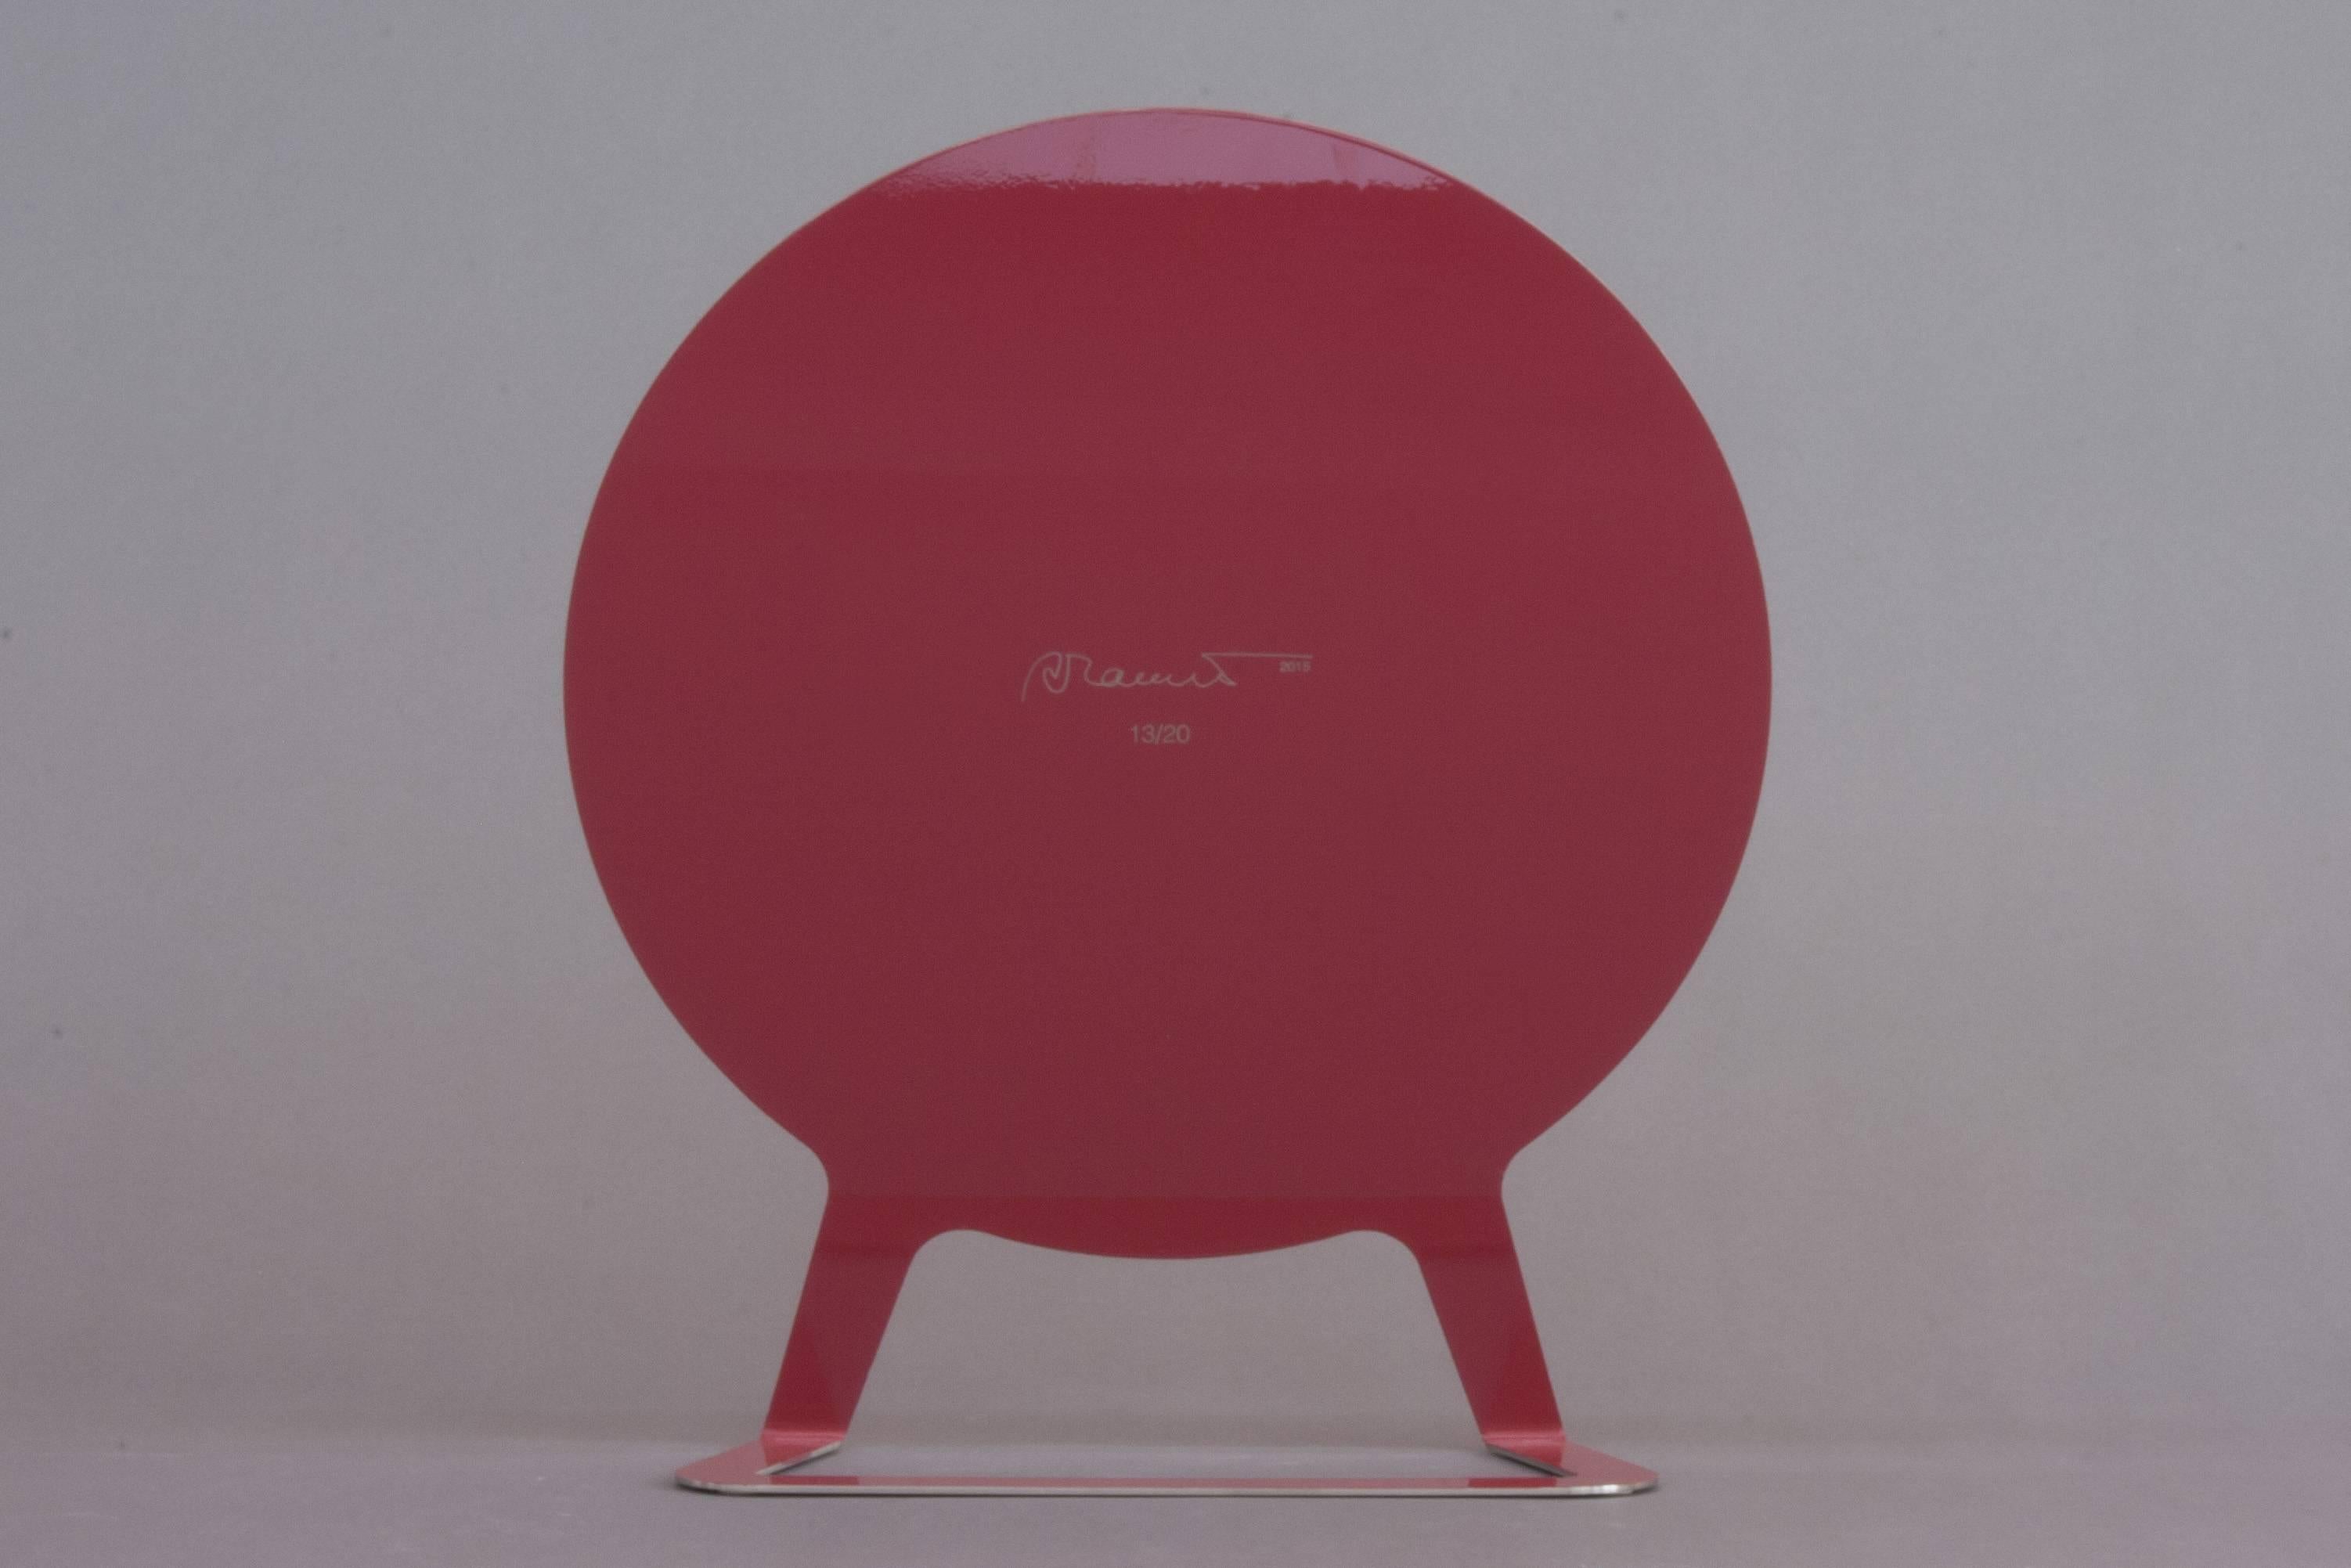 Gong
Polished steel mirror with raspberry lacquered back.
Part of a small edition of 20 pieces, each one with a different color on the back.
Signed, dated and numbered.
This one N° 13/20.